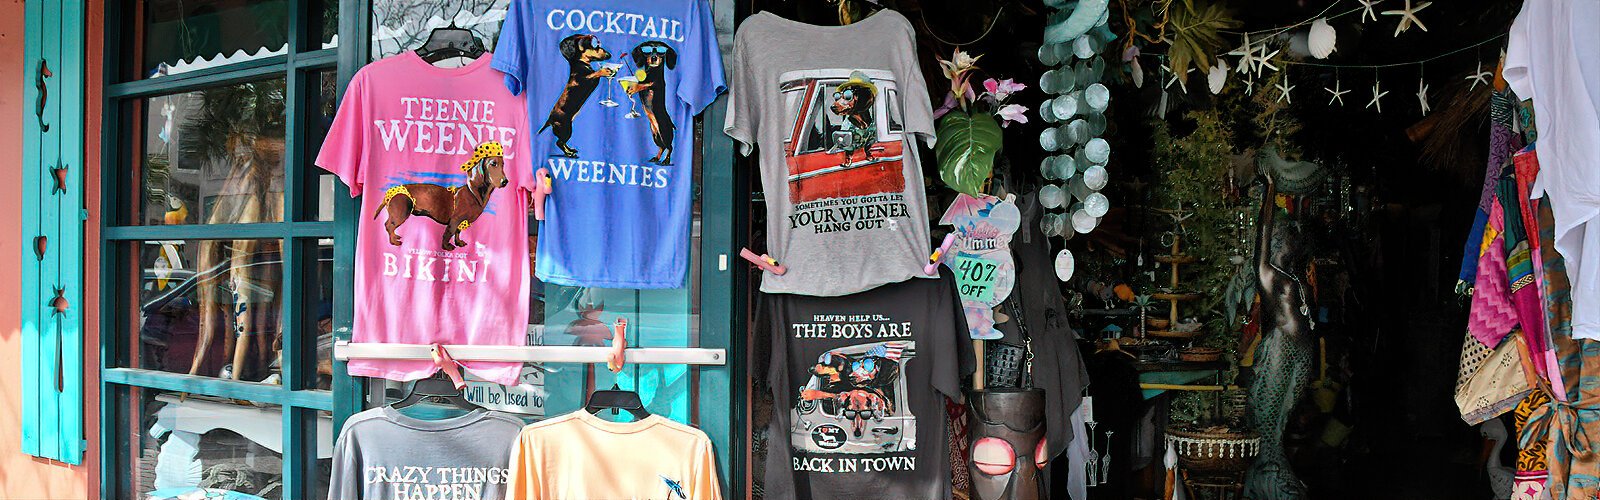 These fun T-shirts displayed outside of this Dunedin eclectic shop demonstrate that Weenies are stars not fading away.